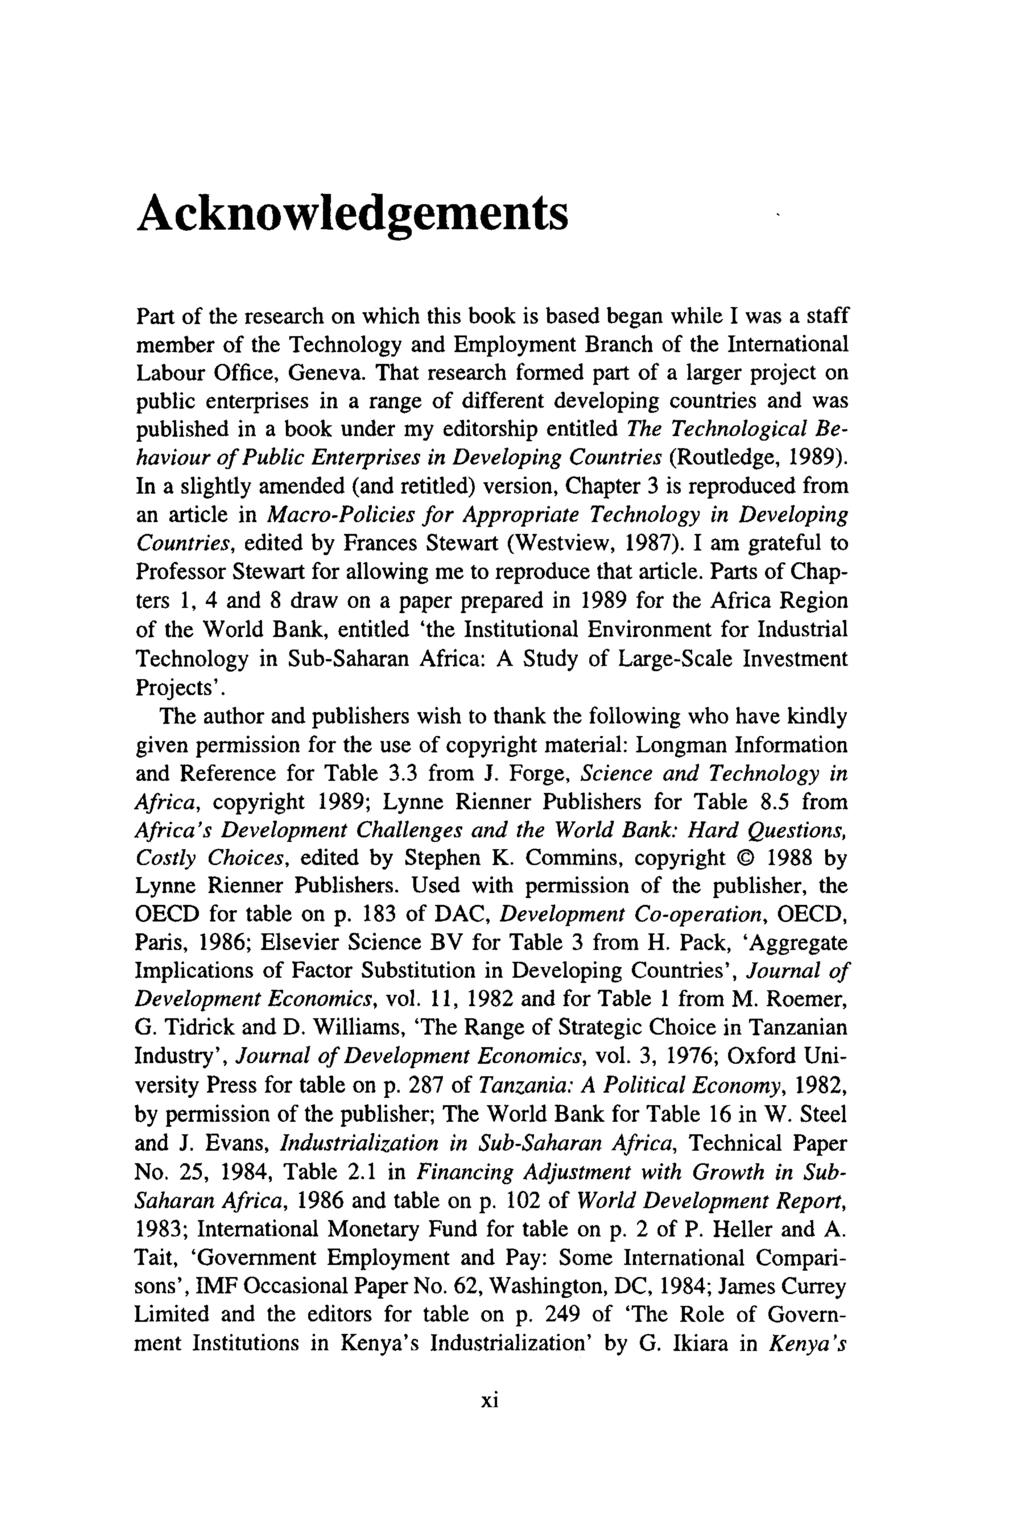 Acknowledgements Part of the research on which this book is based began while I was a staff member of the Technology and Employment Branch of the International Labour Office, Geneva.